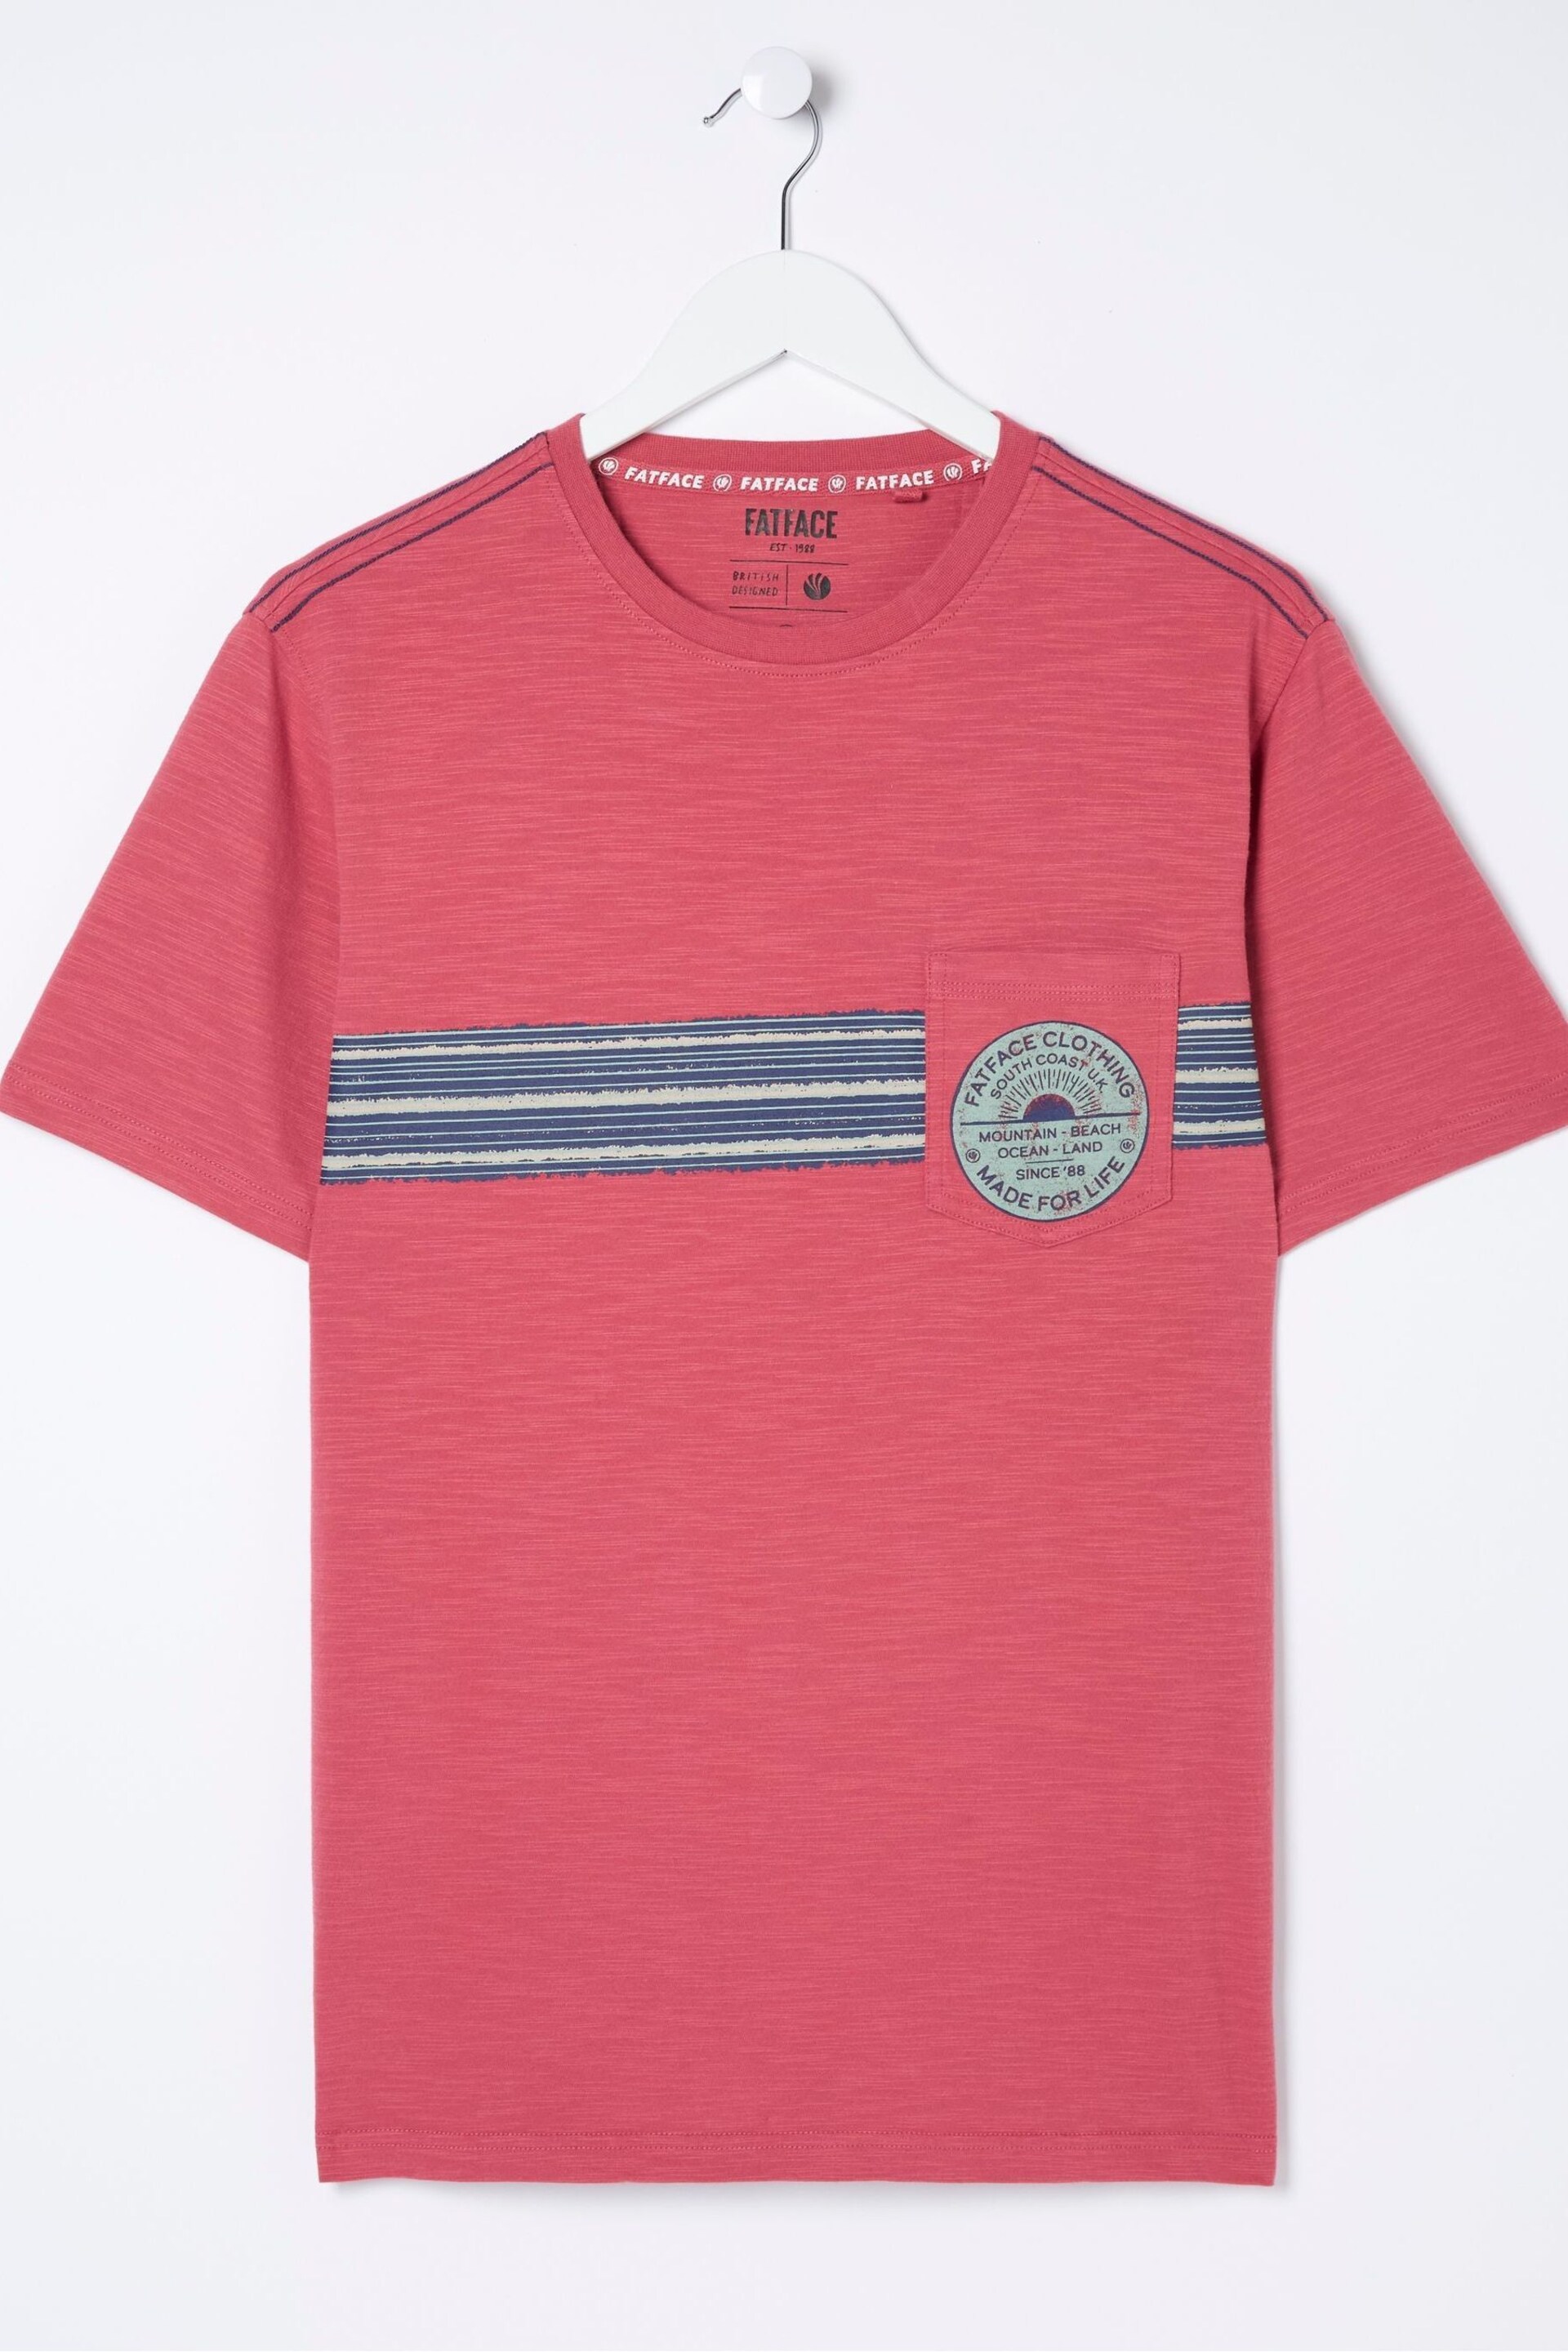 FatFace Pink Chest Stripe Badge T-Shirt - Image 5 of 5